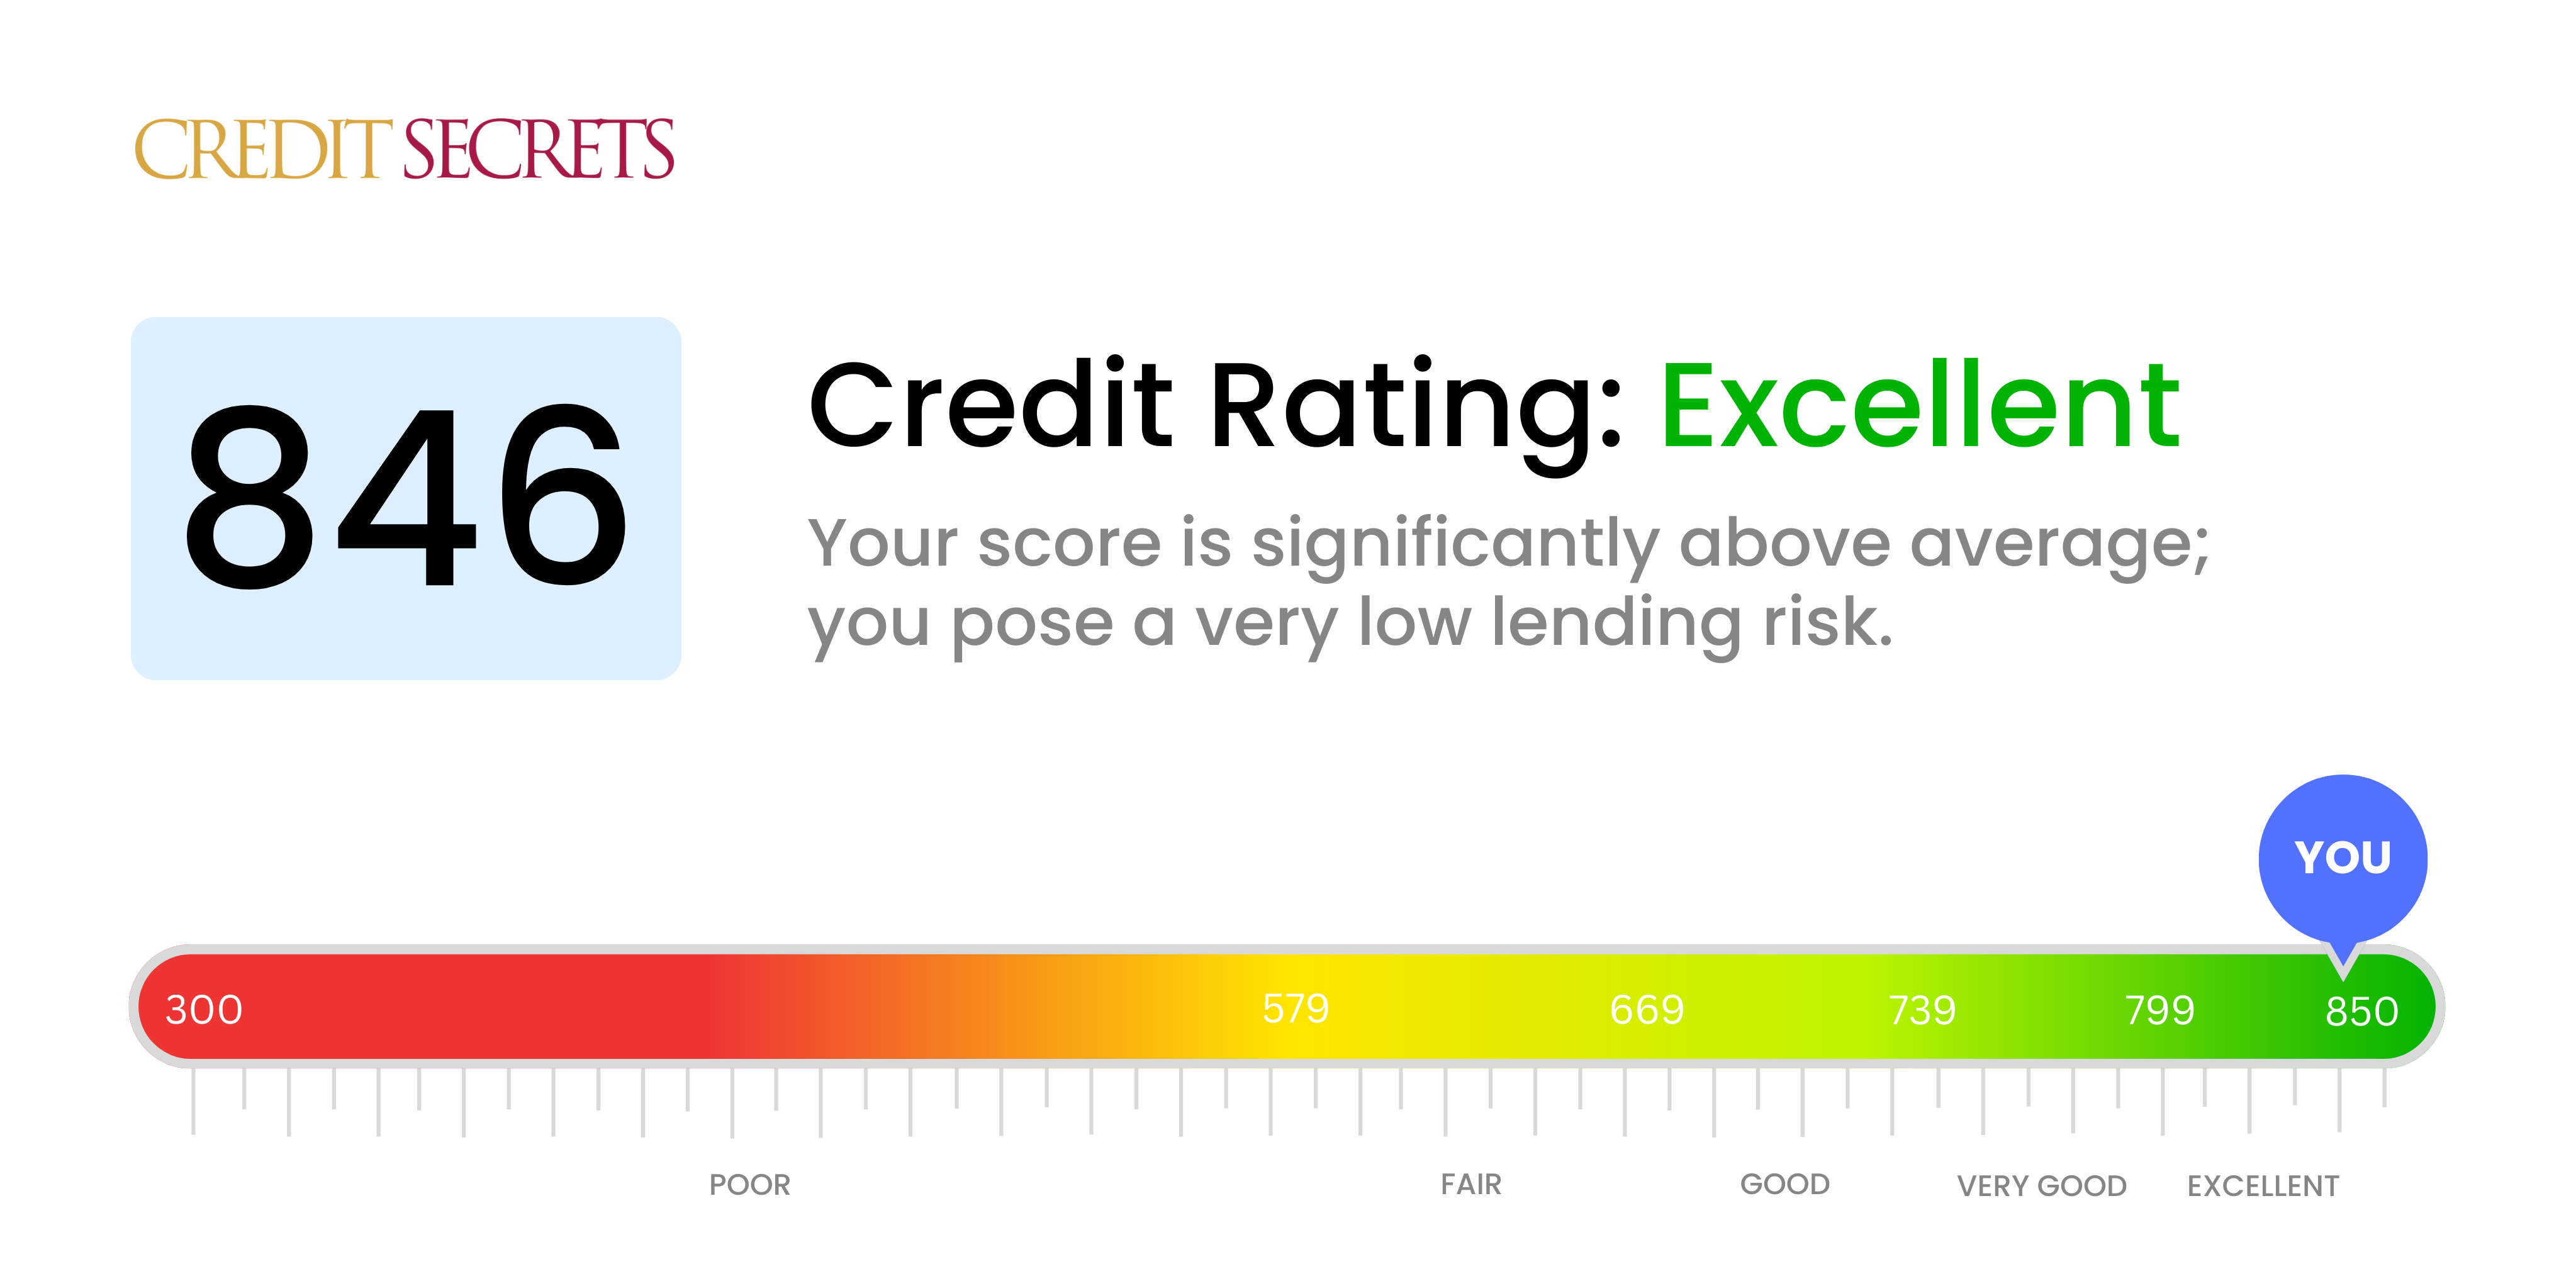 Is 846 a good credit score?